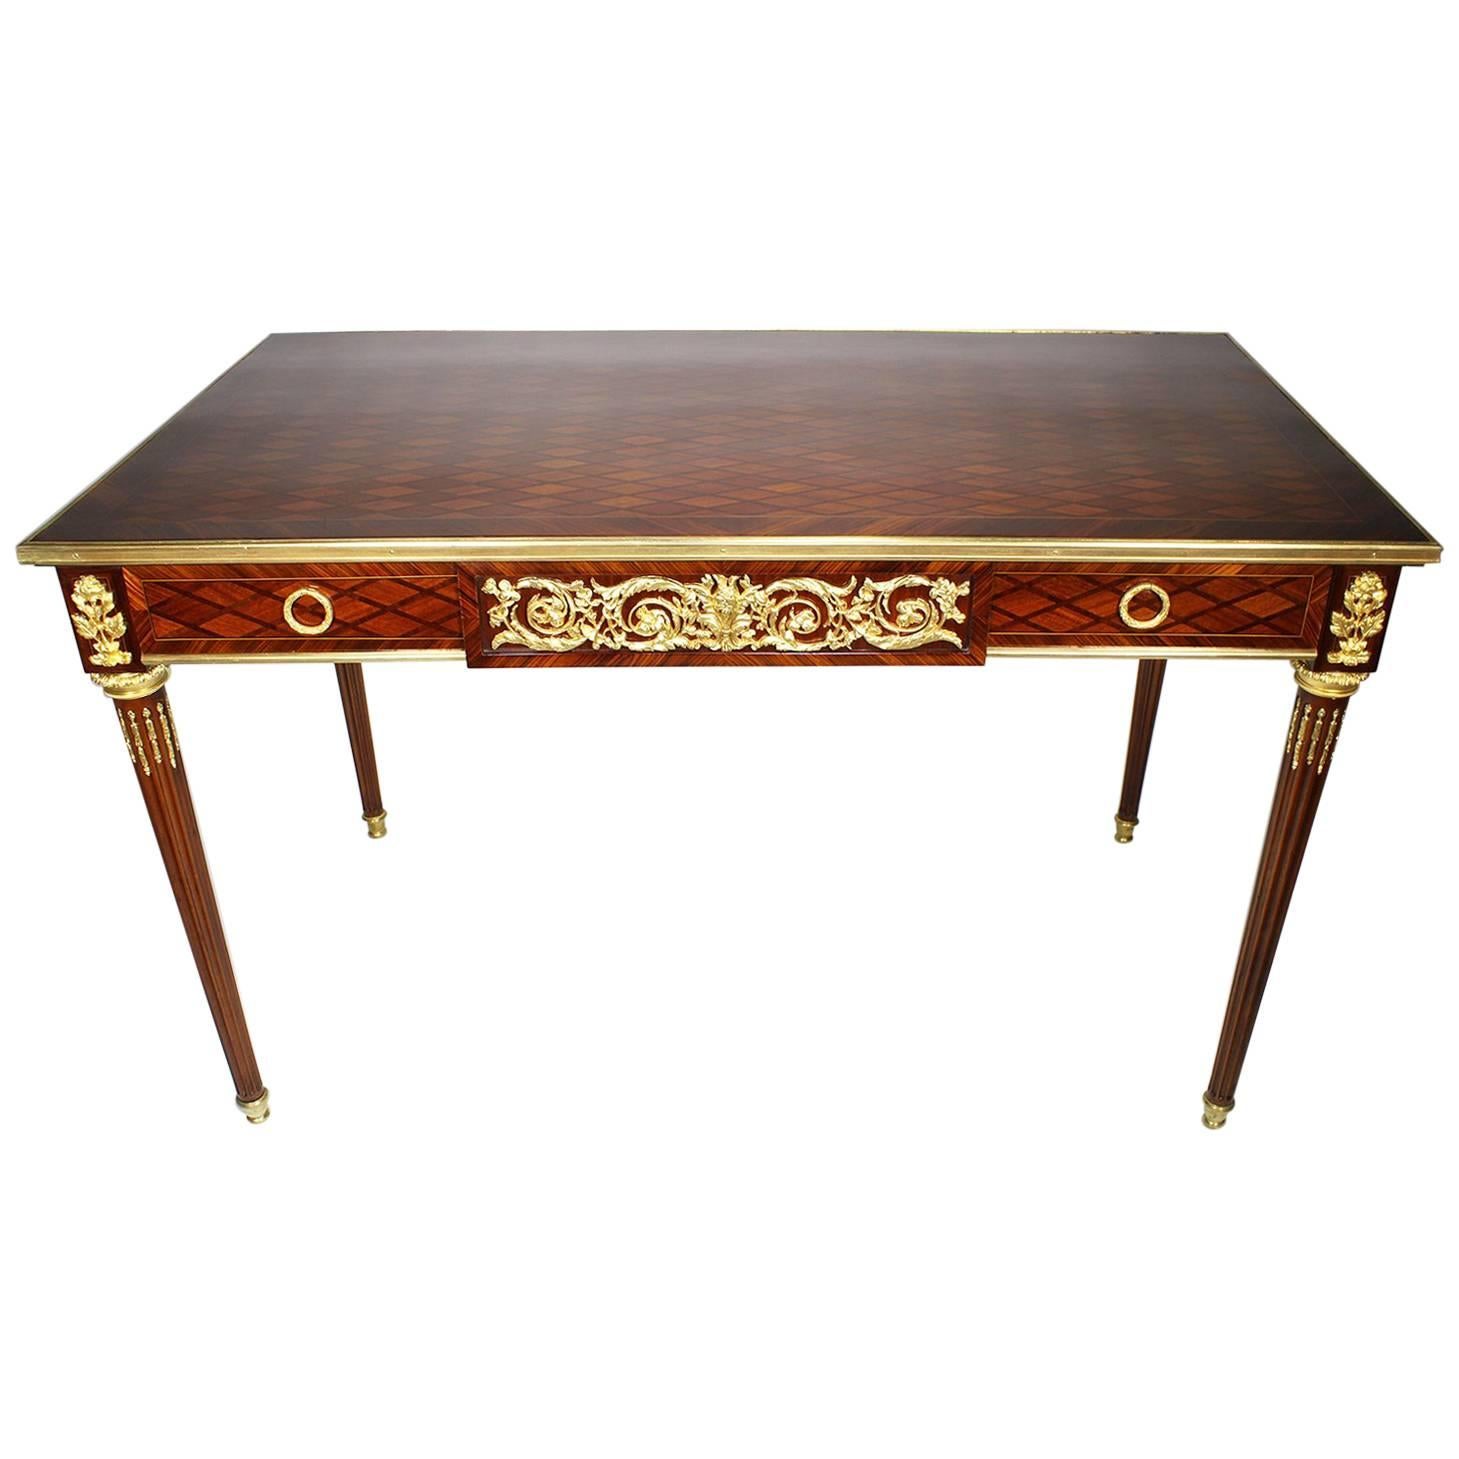 French Louis XVI Style Kingwood Parquetry & Ormolu Mounted Ladies Writing Table